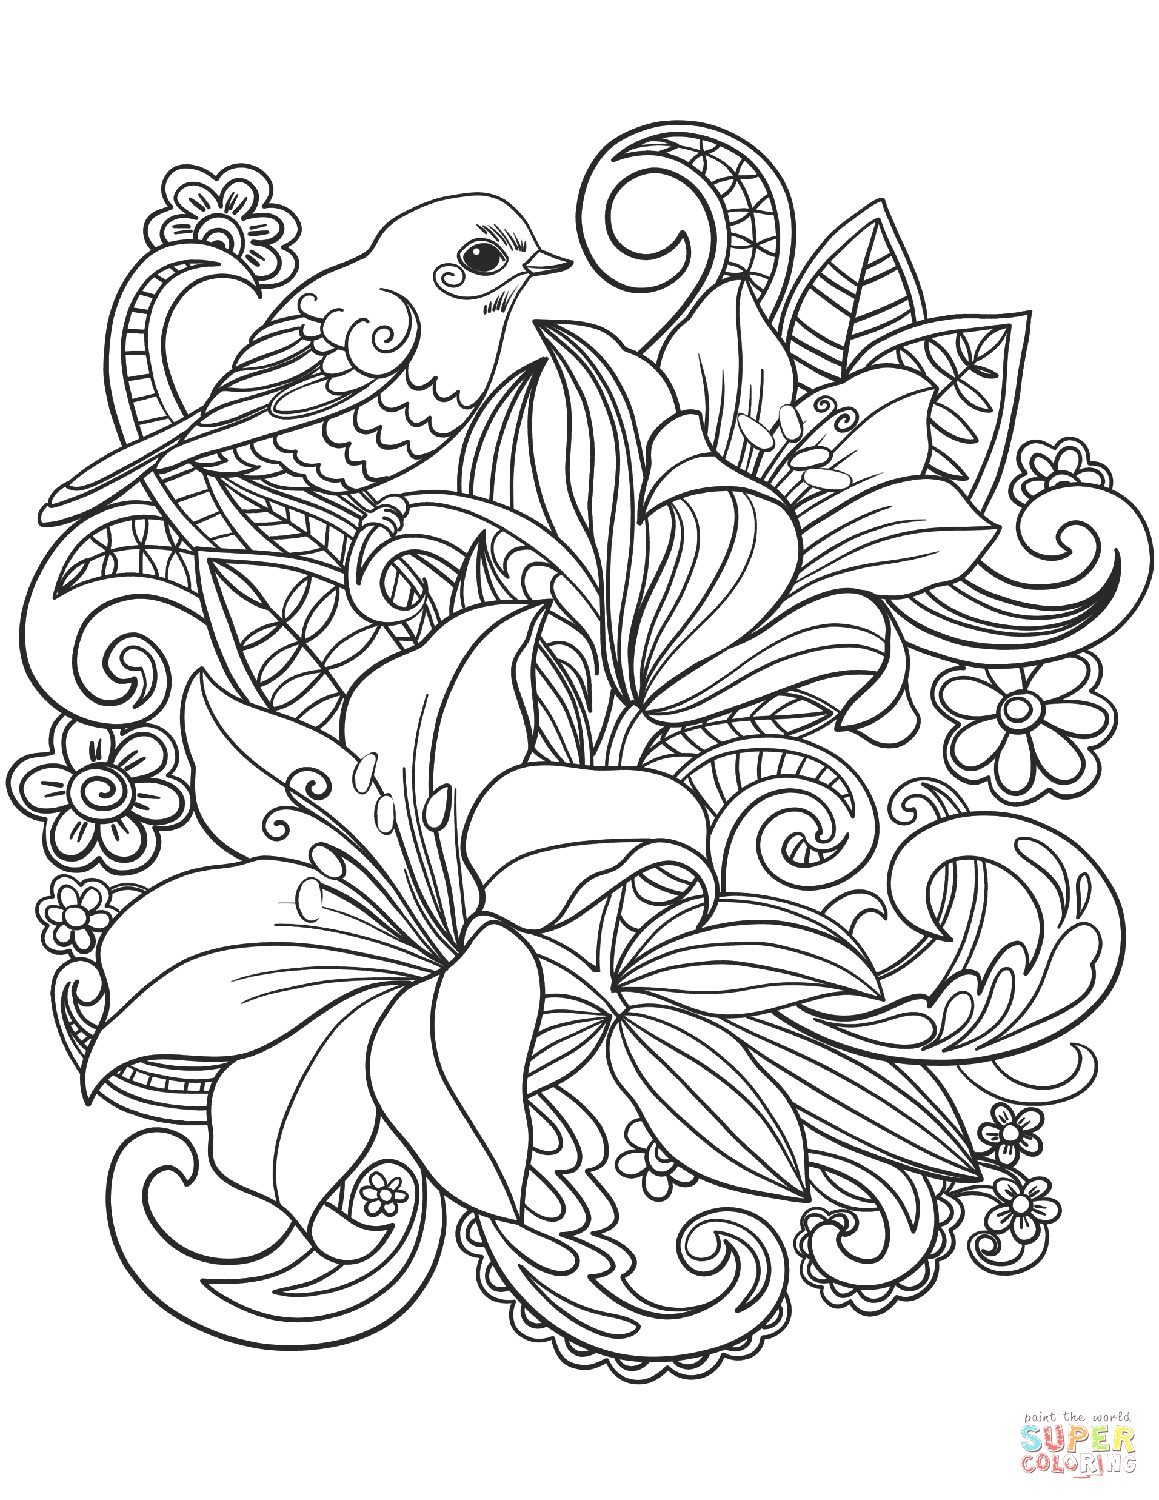 Bouquet Of Flowers Coloring Page Obsession Colouring Pages Flowers Skylark And Coloring Page Free